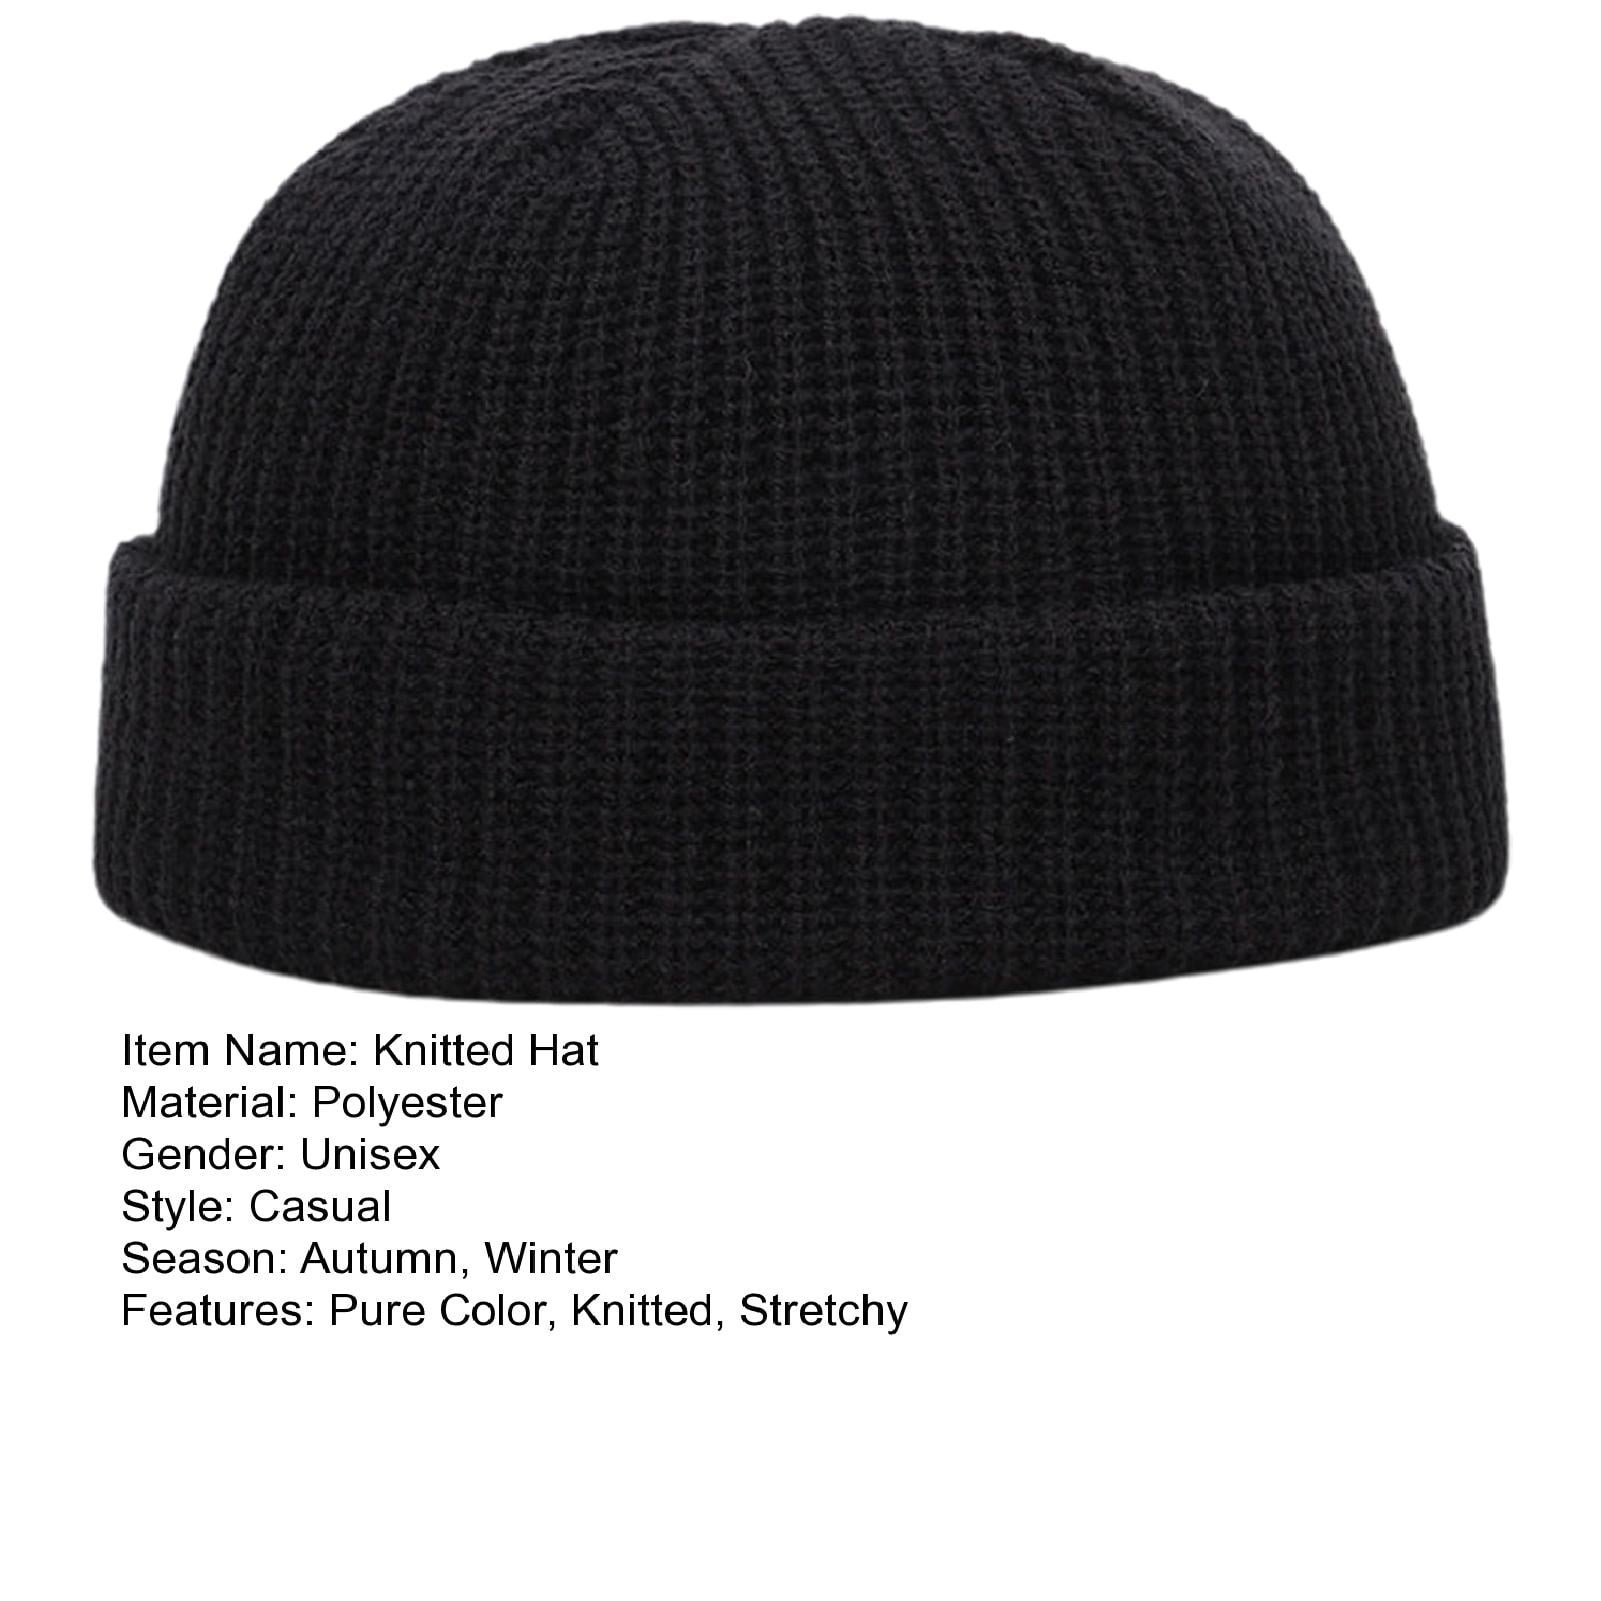 Luxury Designer Knitted Beanie Hats For Men And Women Classic Autumn/Winter  Style, Warm And Fashionable Knit Beanie Skull Cap For Outdoor Activities  JJJ1 From Fshpj20lv, $8.9